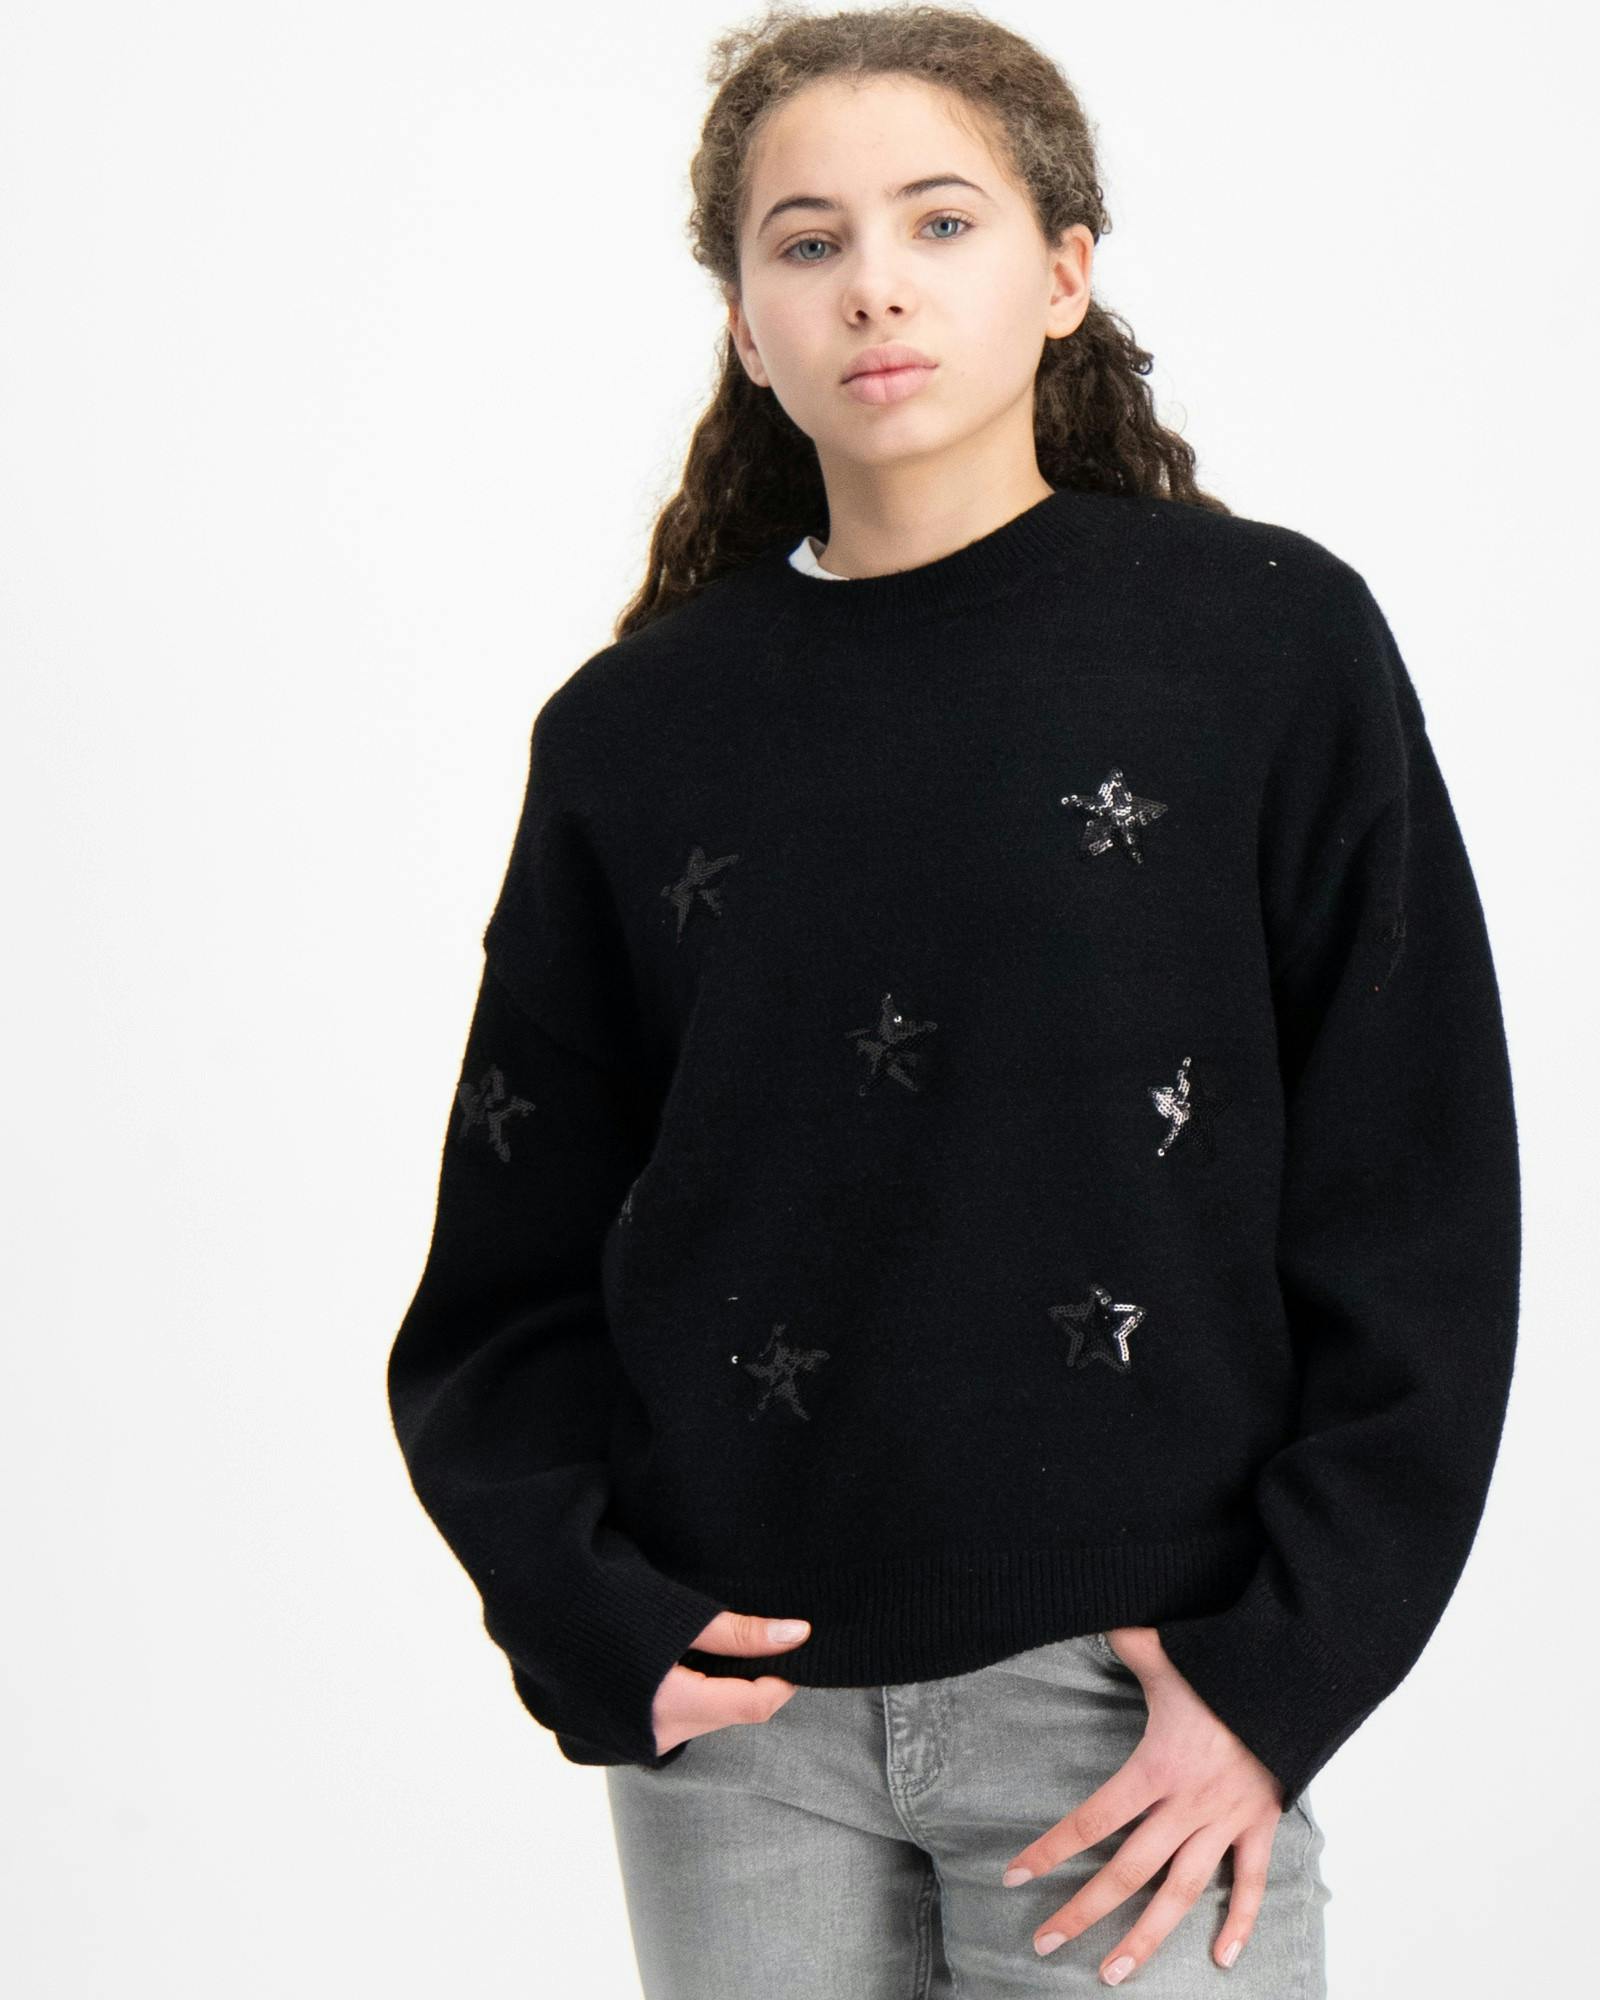 Y knitted star sweater